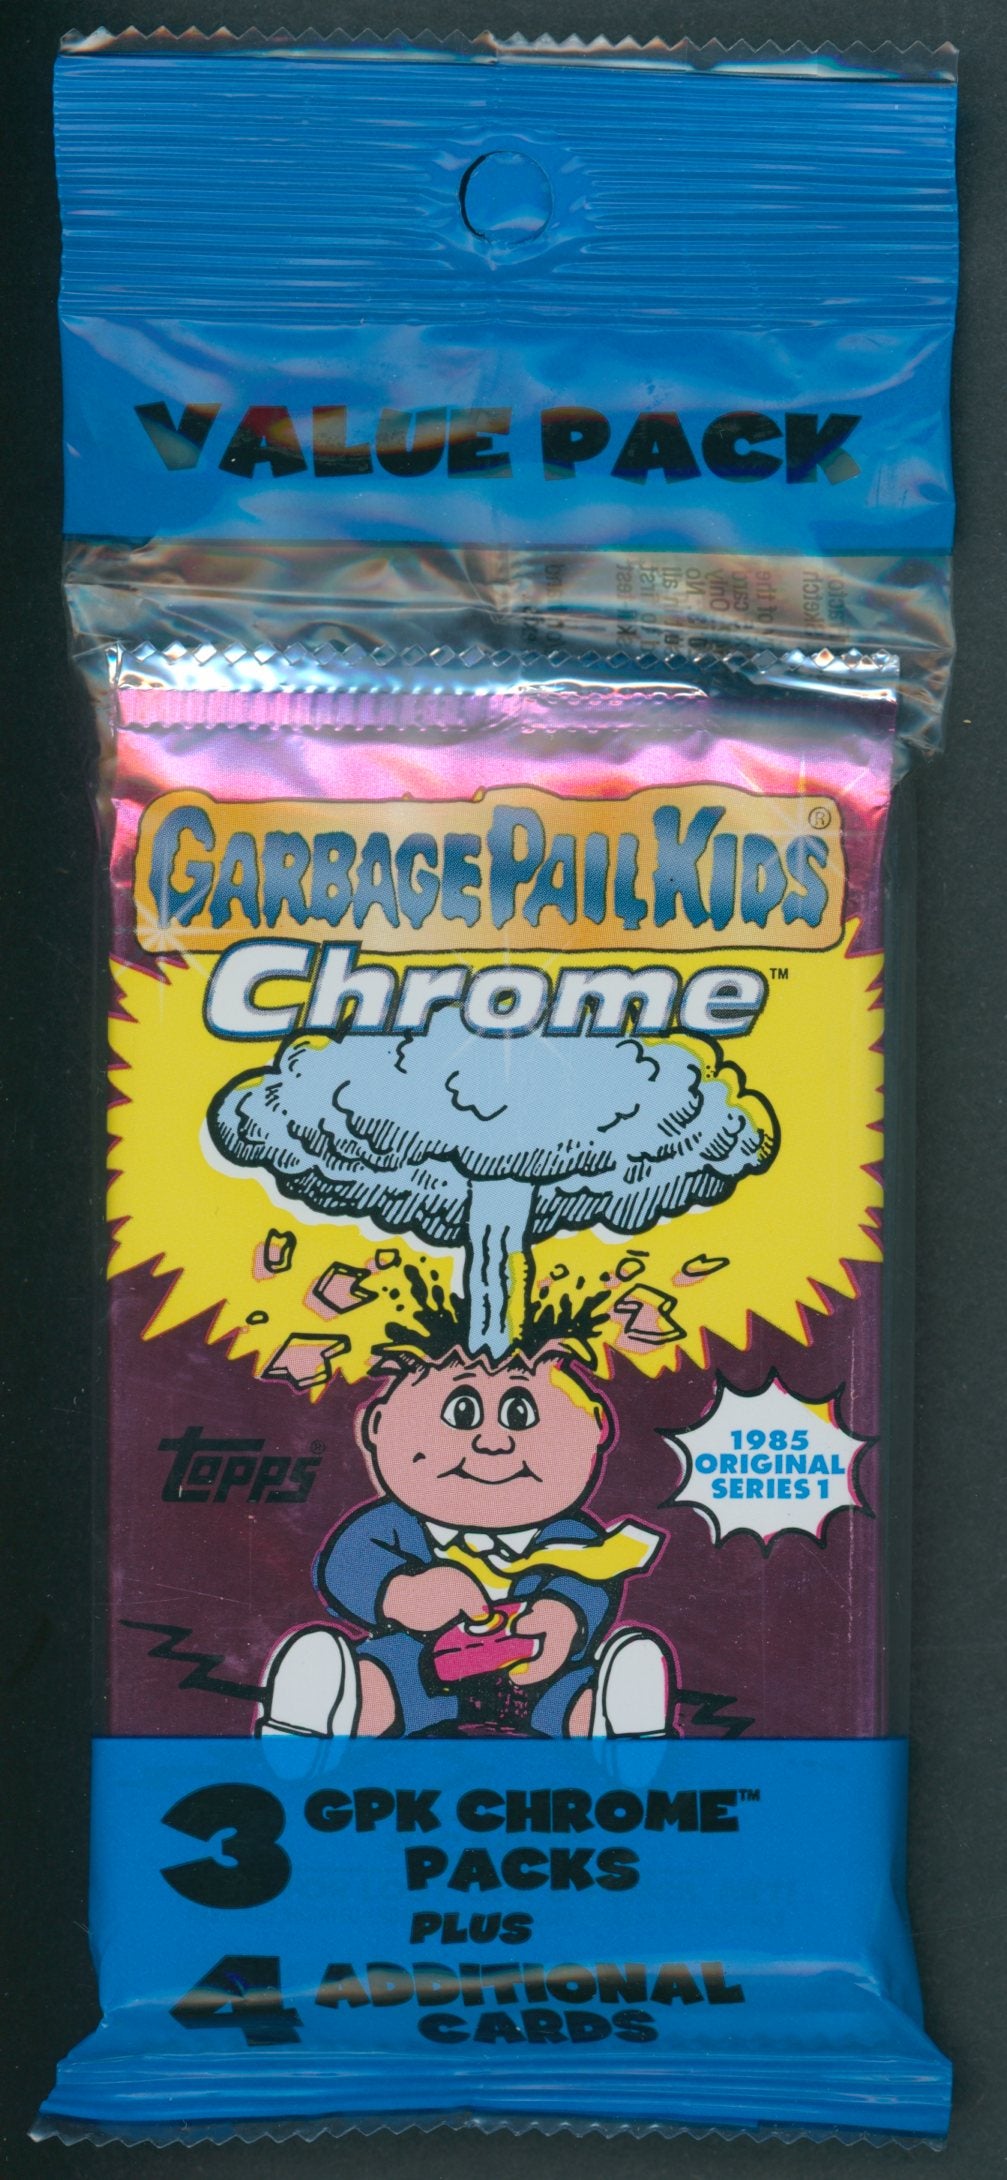 2013 Topps Chrome Garbage Pail Kids Series 1 Unopened Value Pack